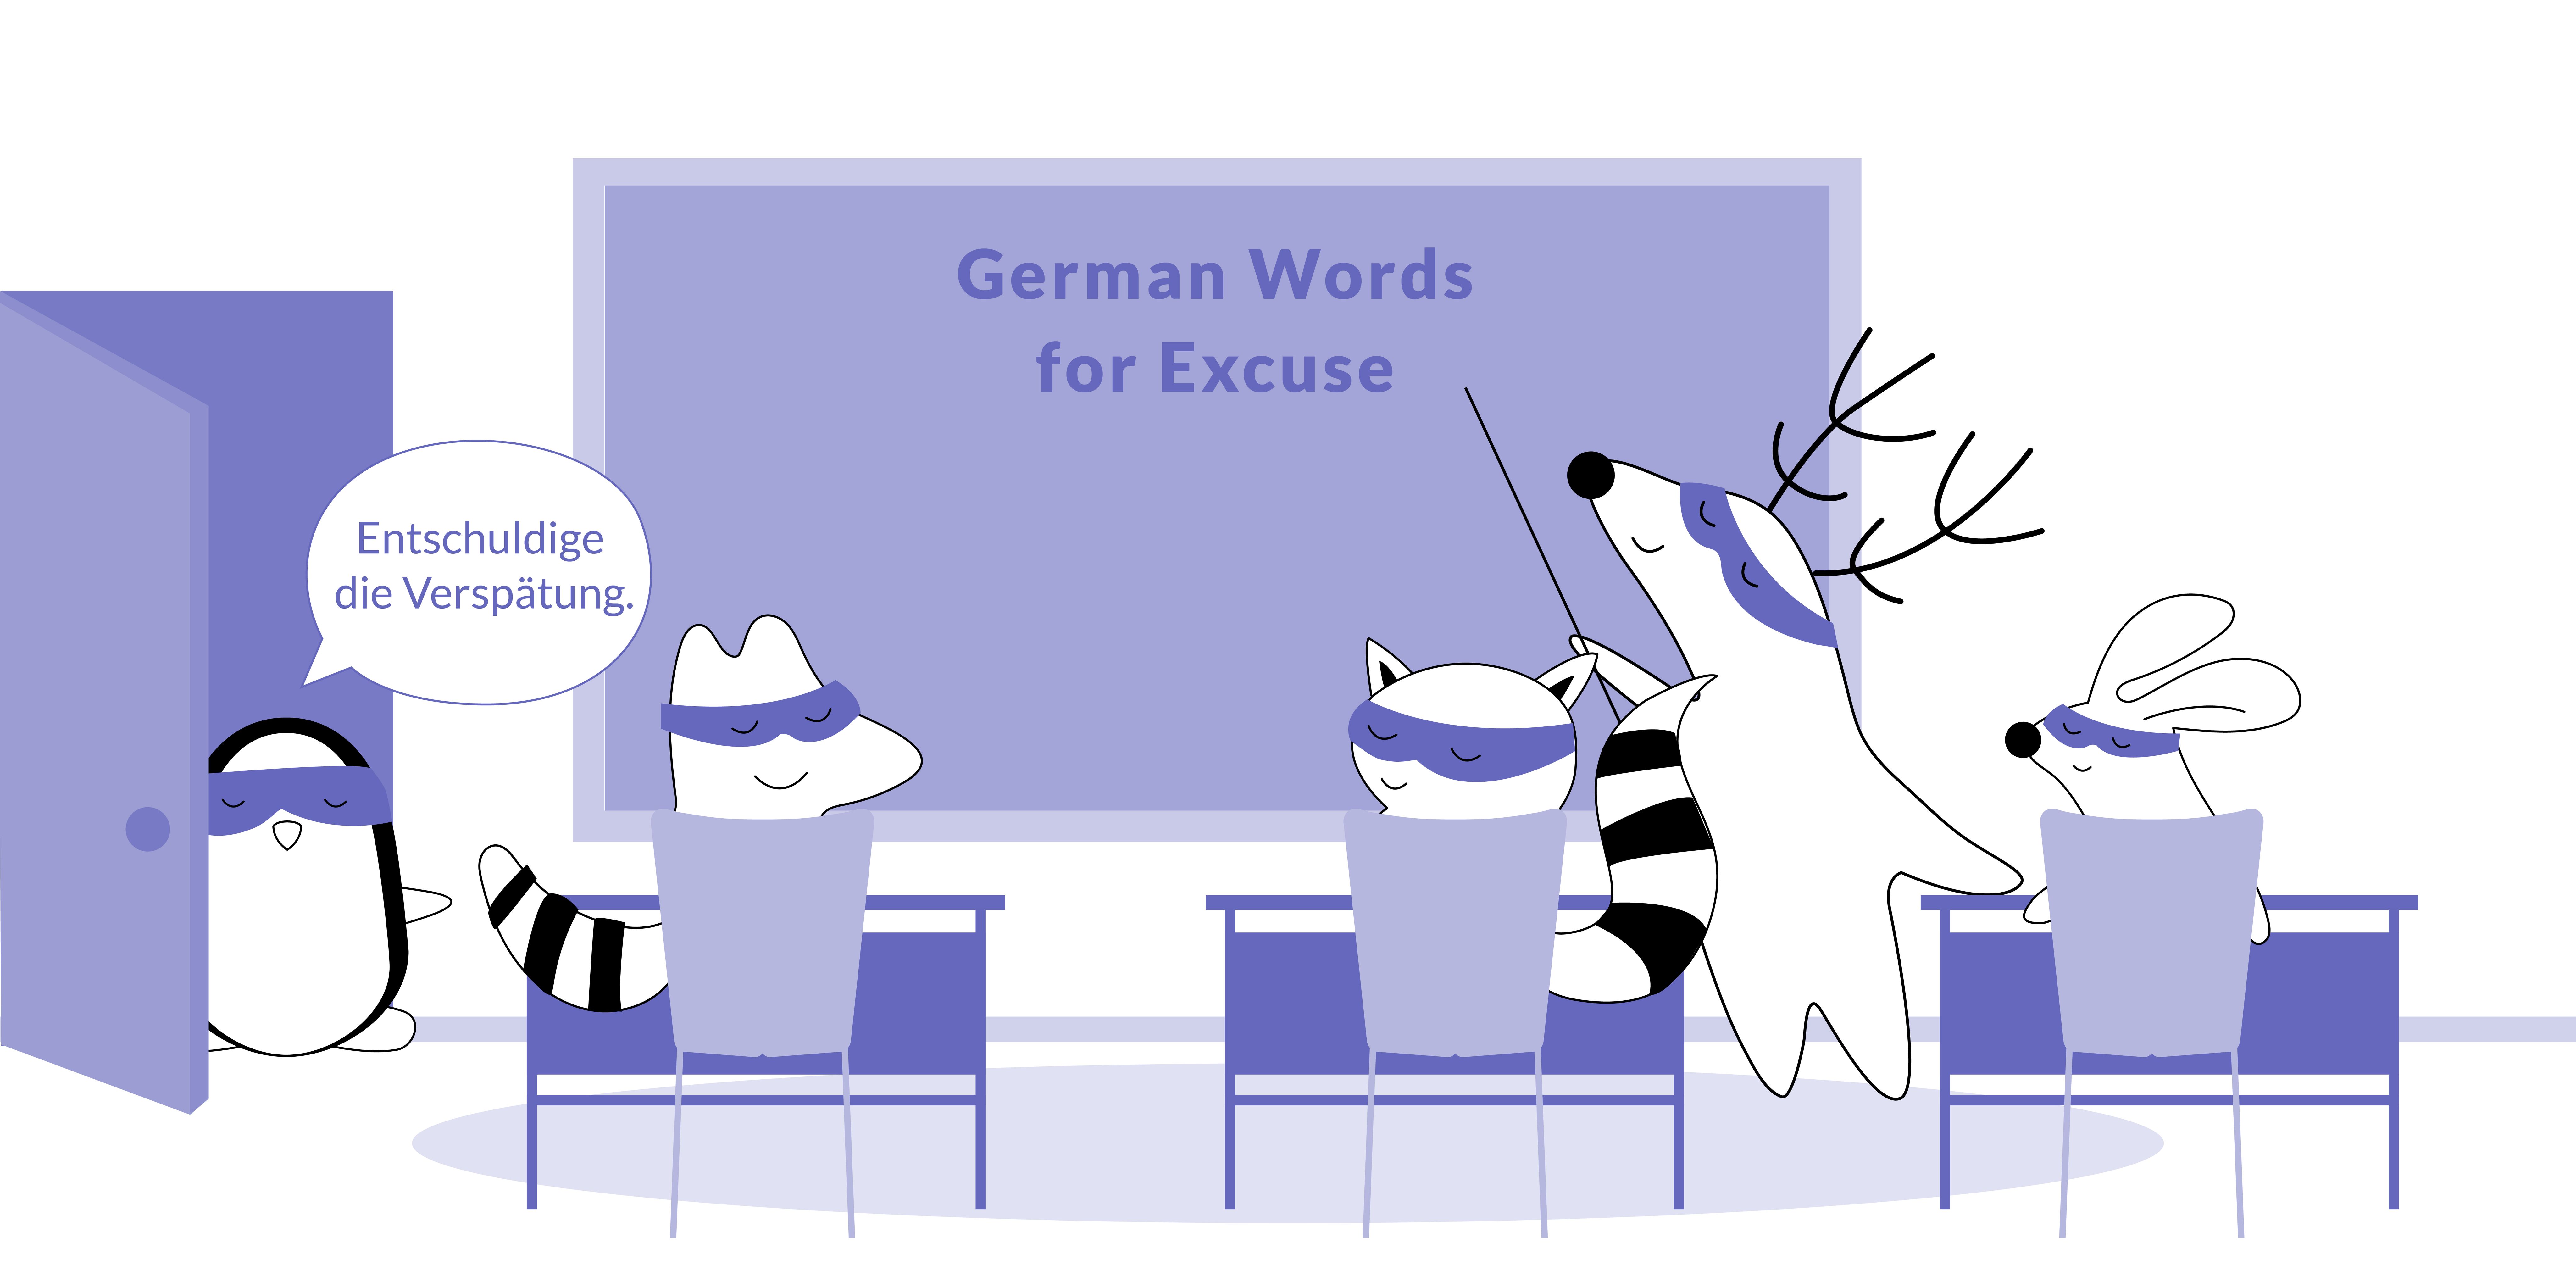 Pocky enters the classroom where others are already sitting at their desks, saying, “Entschuldige die Verspätung.”